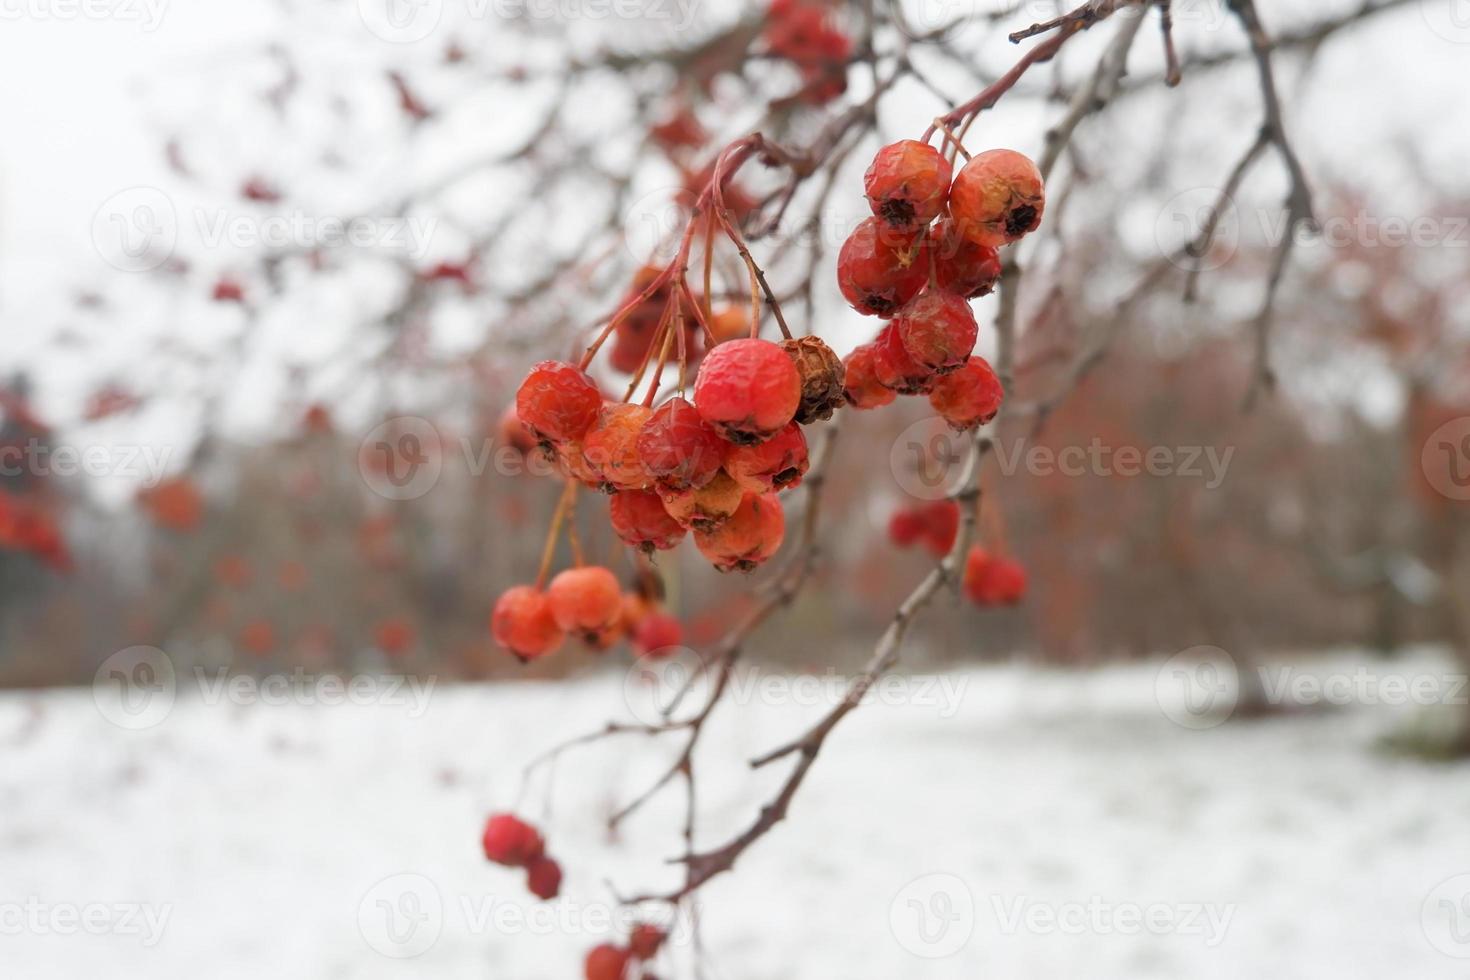 Dried fruits in the winter season in Moscow photo